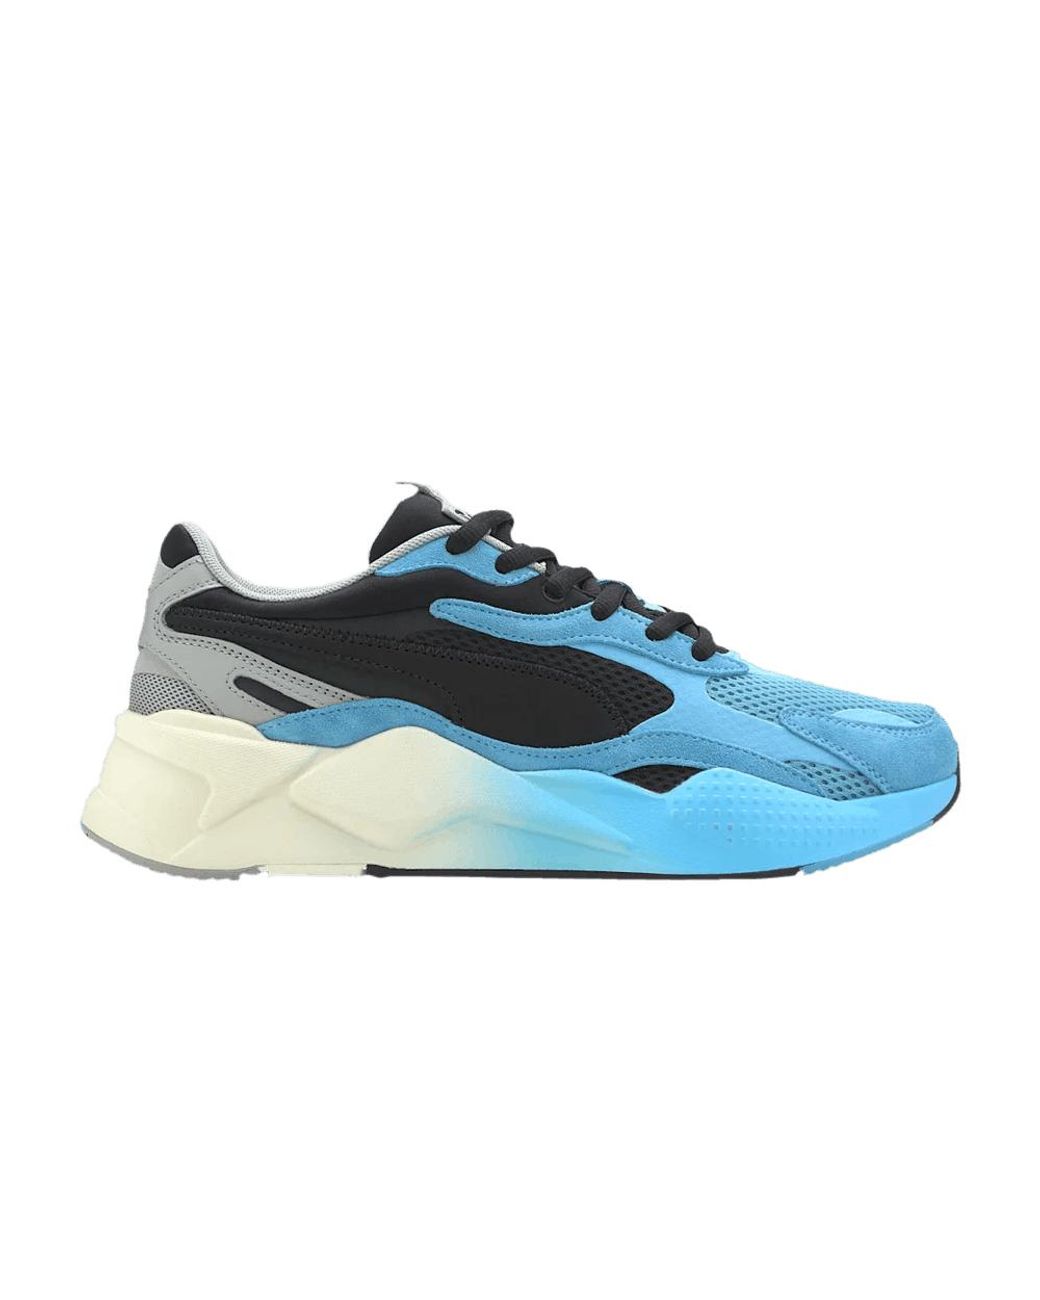 PUMA Rs-x3 in Blue for Men - Lyst